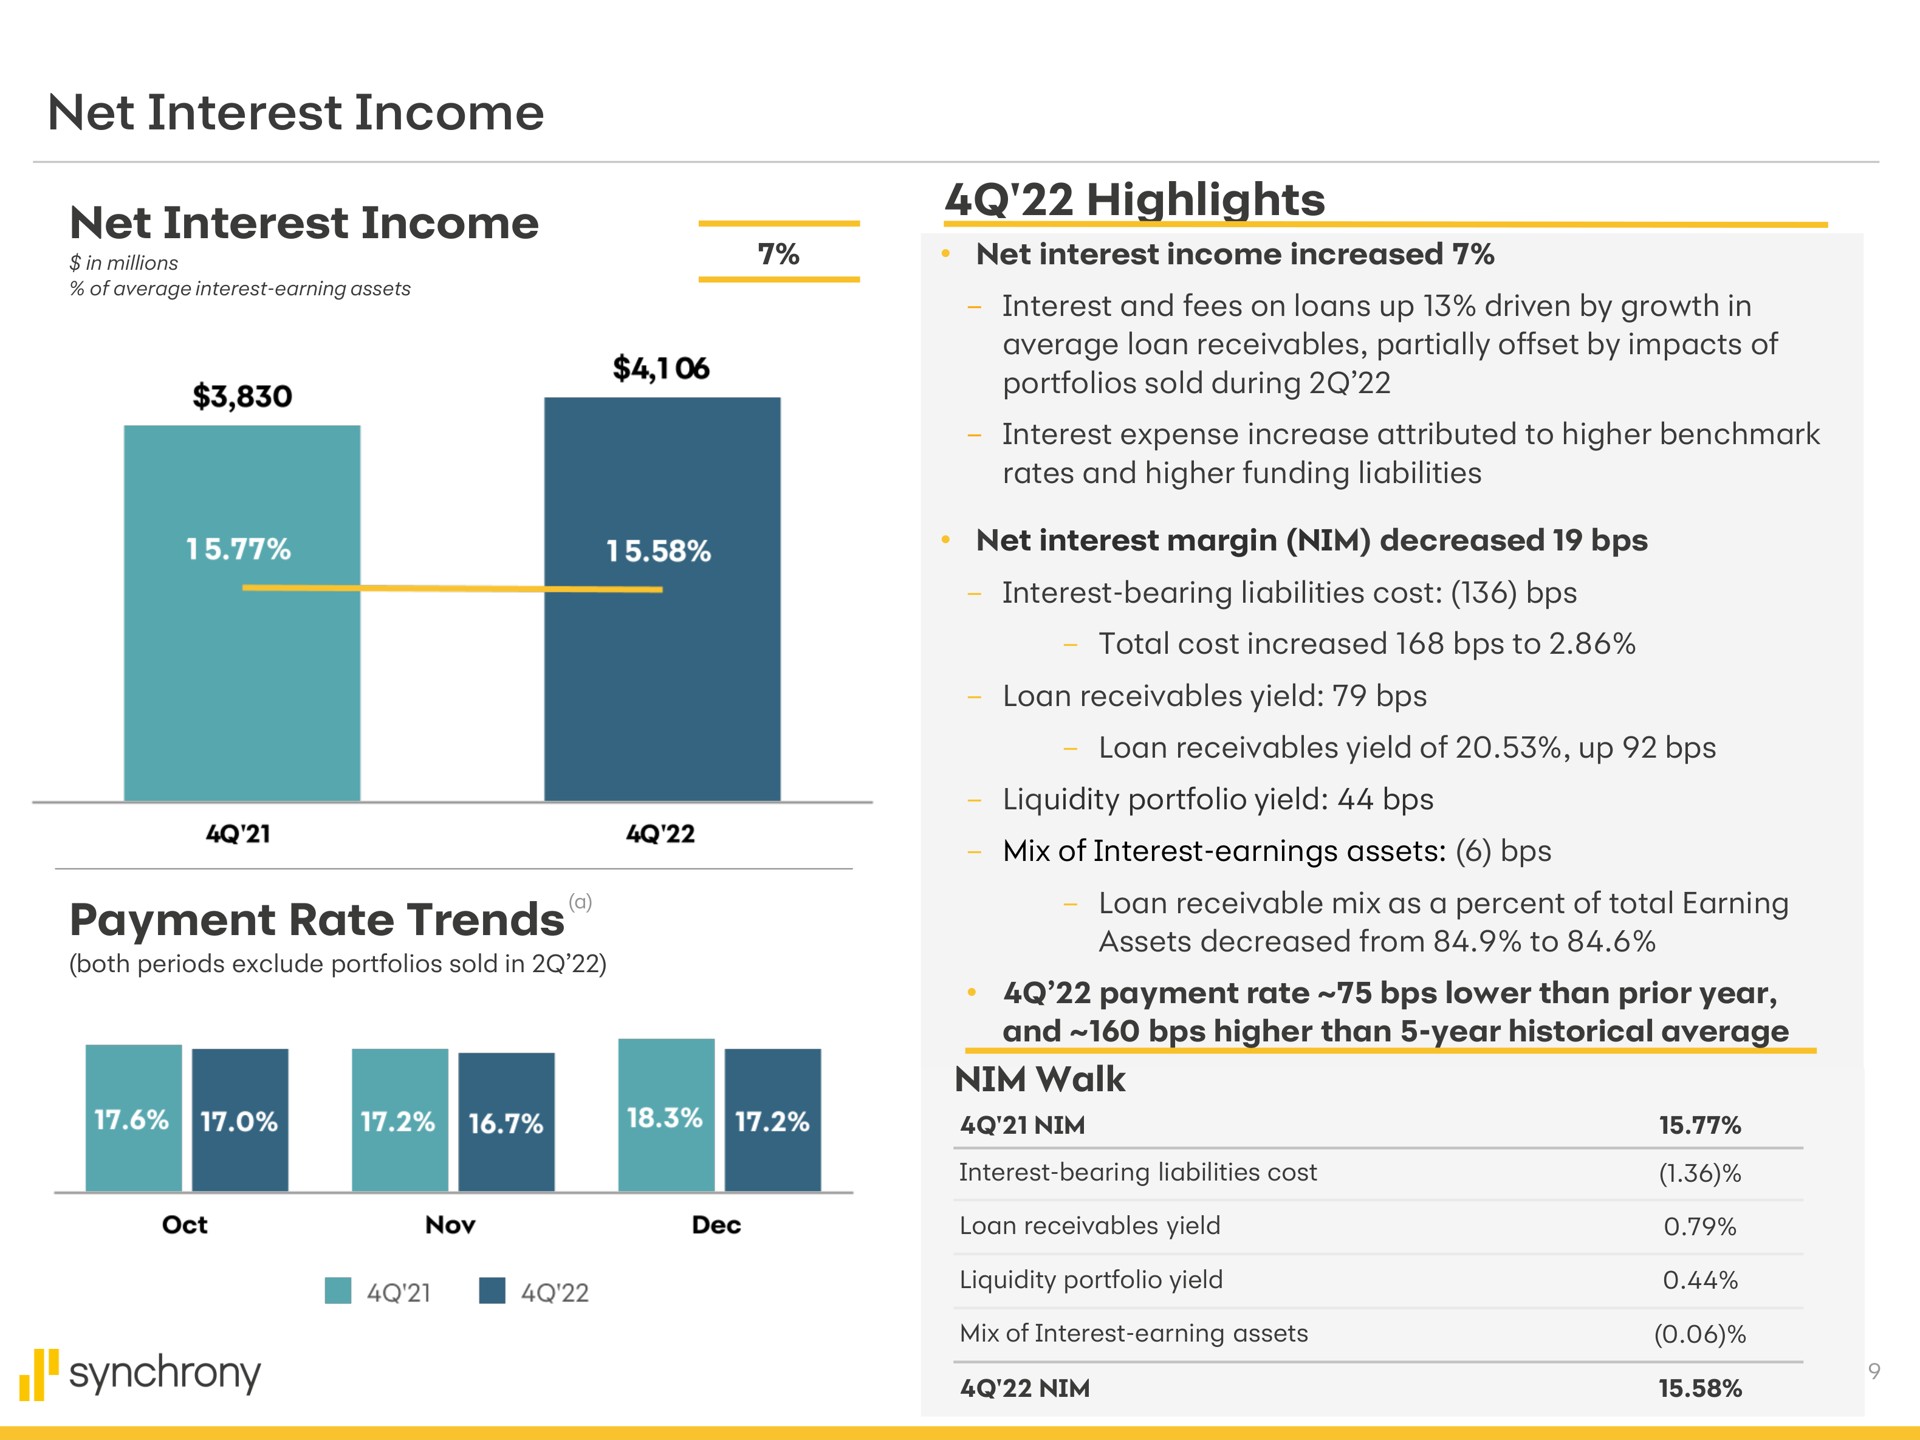 net interest income net interest income payment rate trends highlights nim walk synchrony | Synchrony Financial